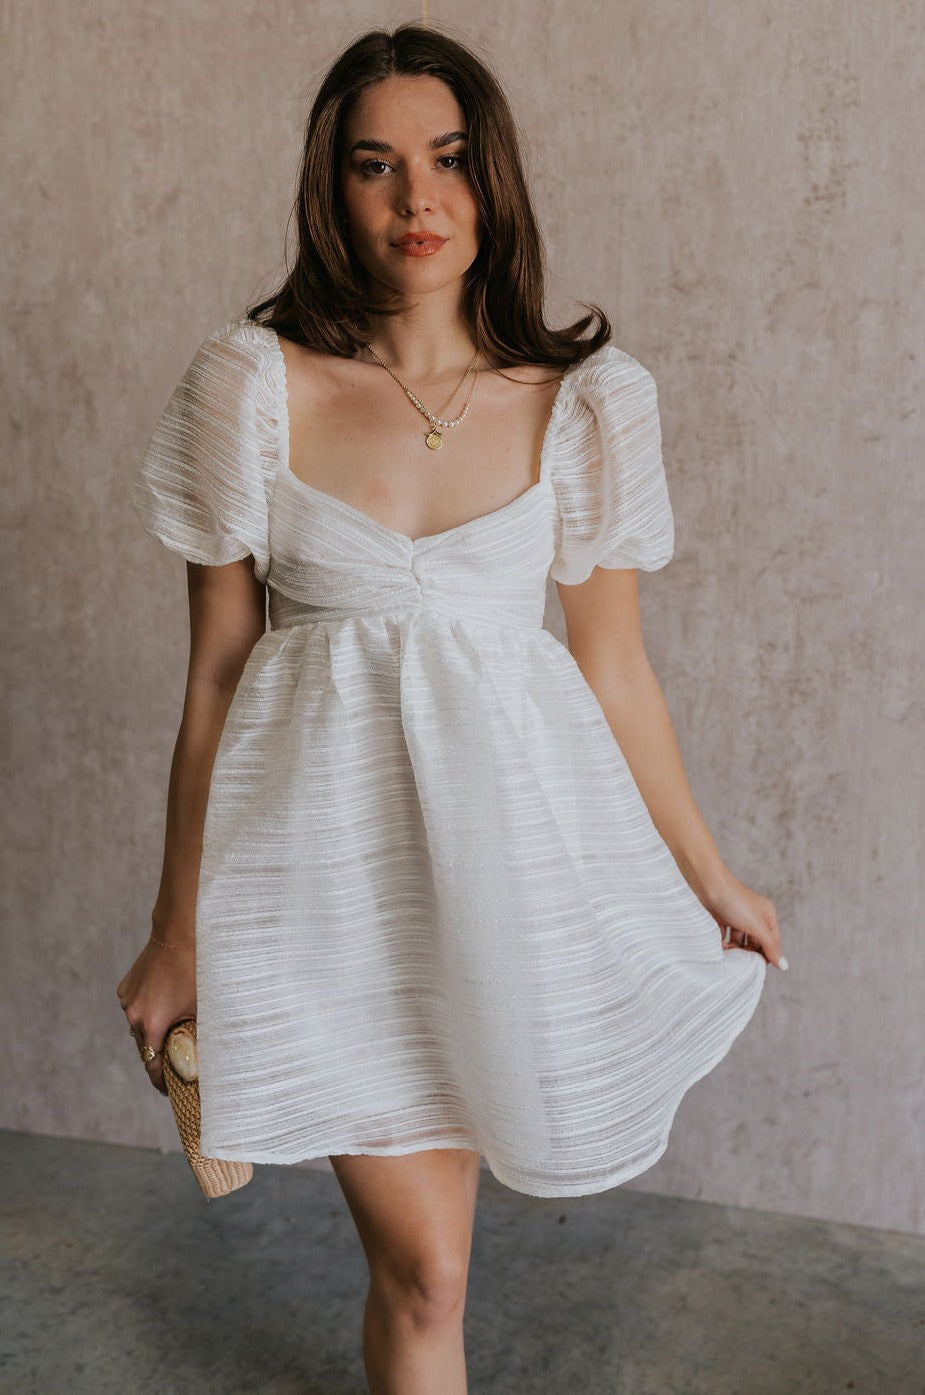 Front view of female model wearing the Julia Off White Short Puff Sleeve Mini Dress which features Off White Stripe Sheer Fabric, White Lining, Mini Length, Ruched Upper, Sweetheart Neckline, Short Puff Sleeves and Back Cut-Out Detail with Zipper and Tie Closure